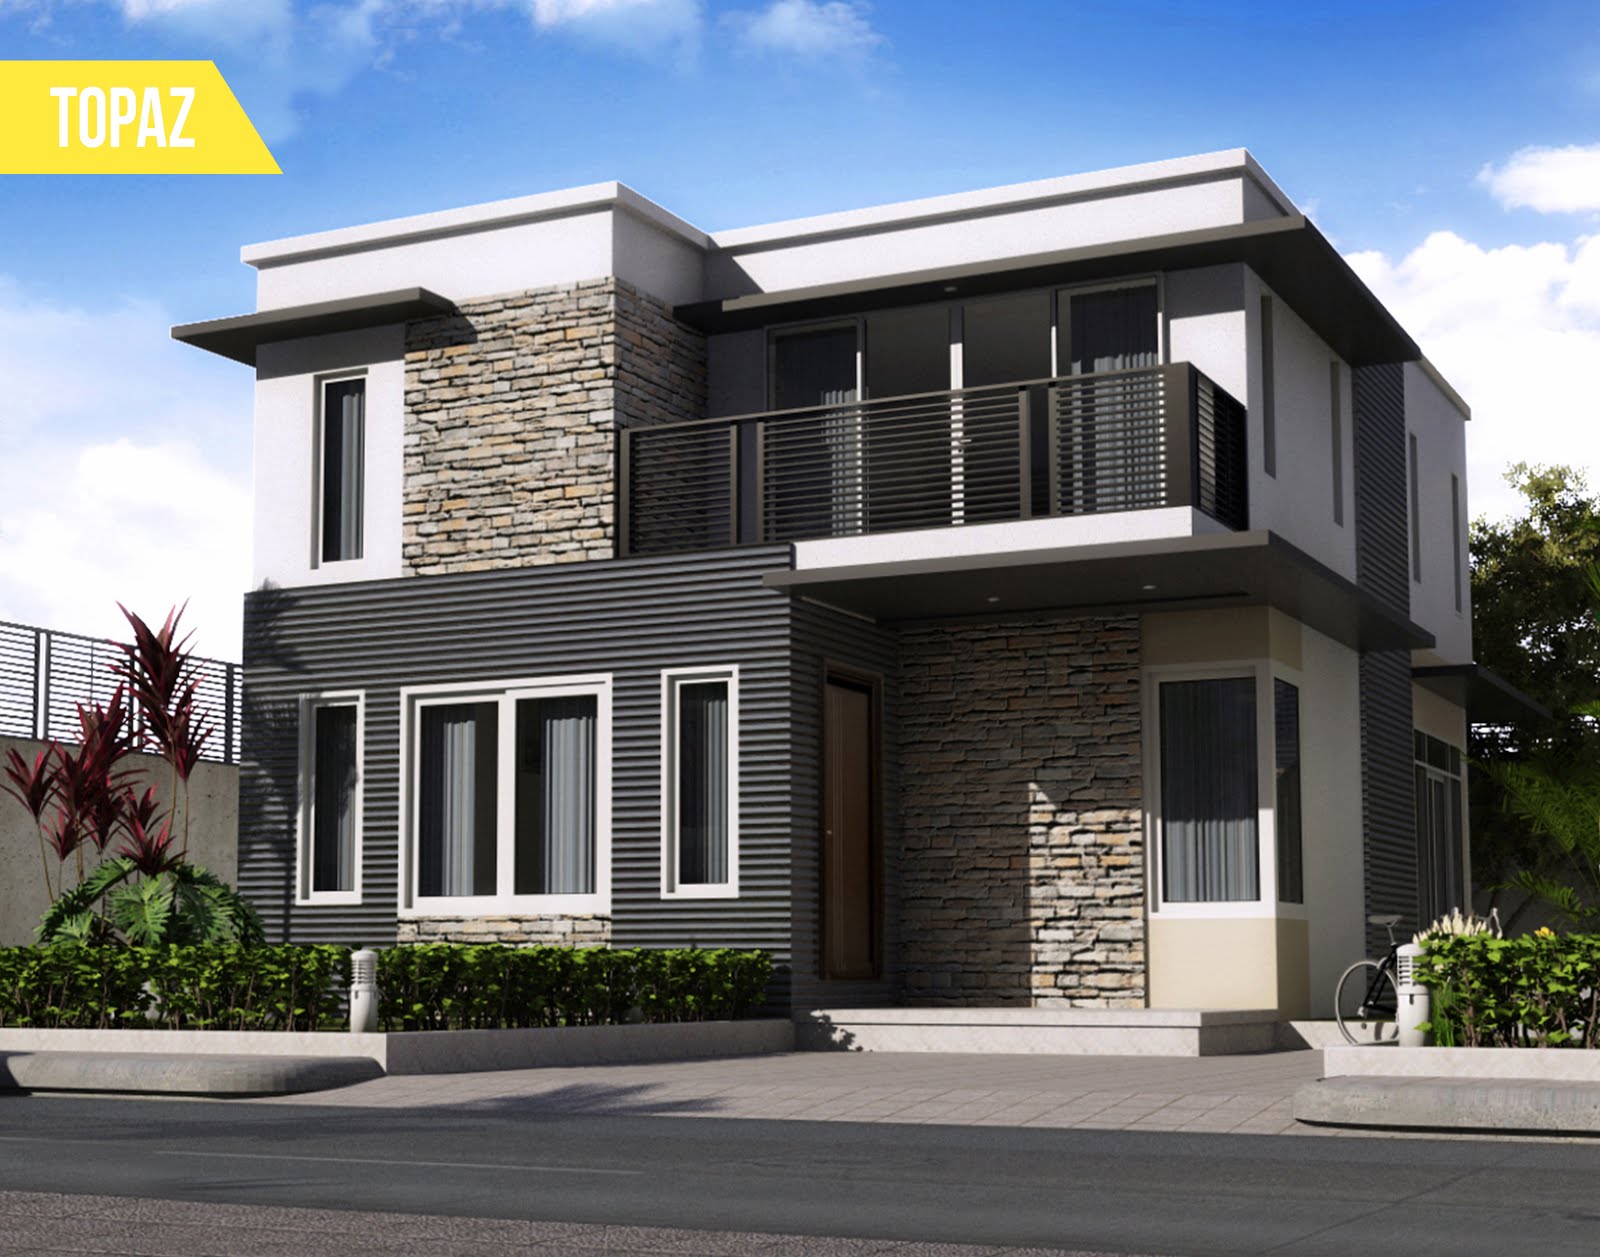 A Smart Philippine House Builder: Finding the Best New House Design image 3